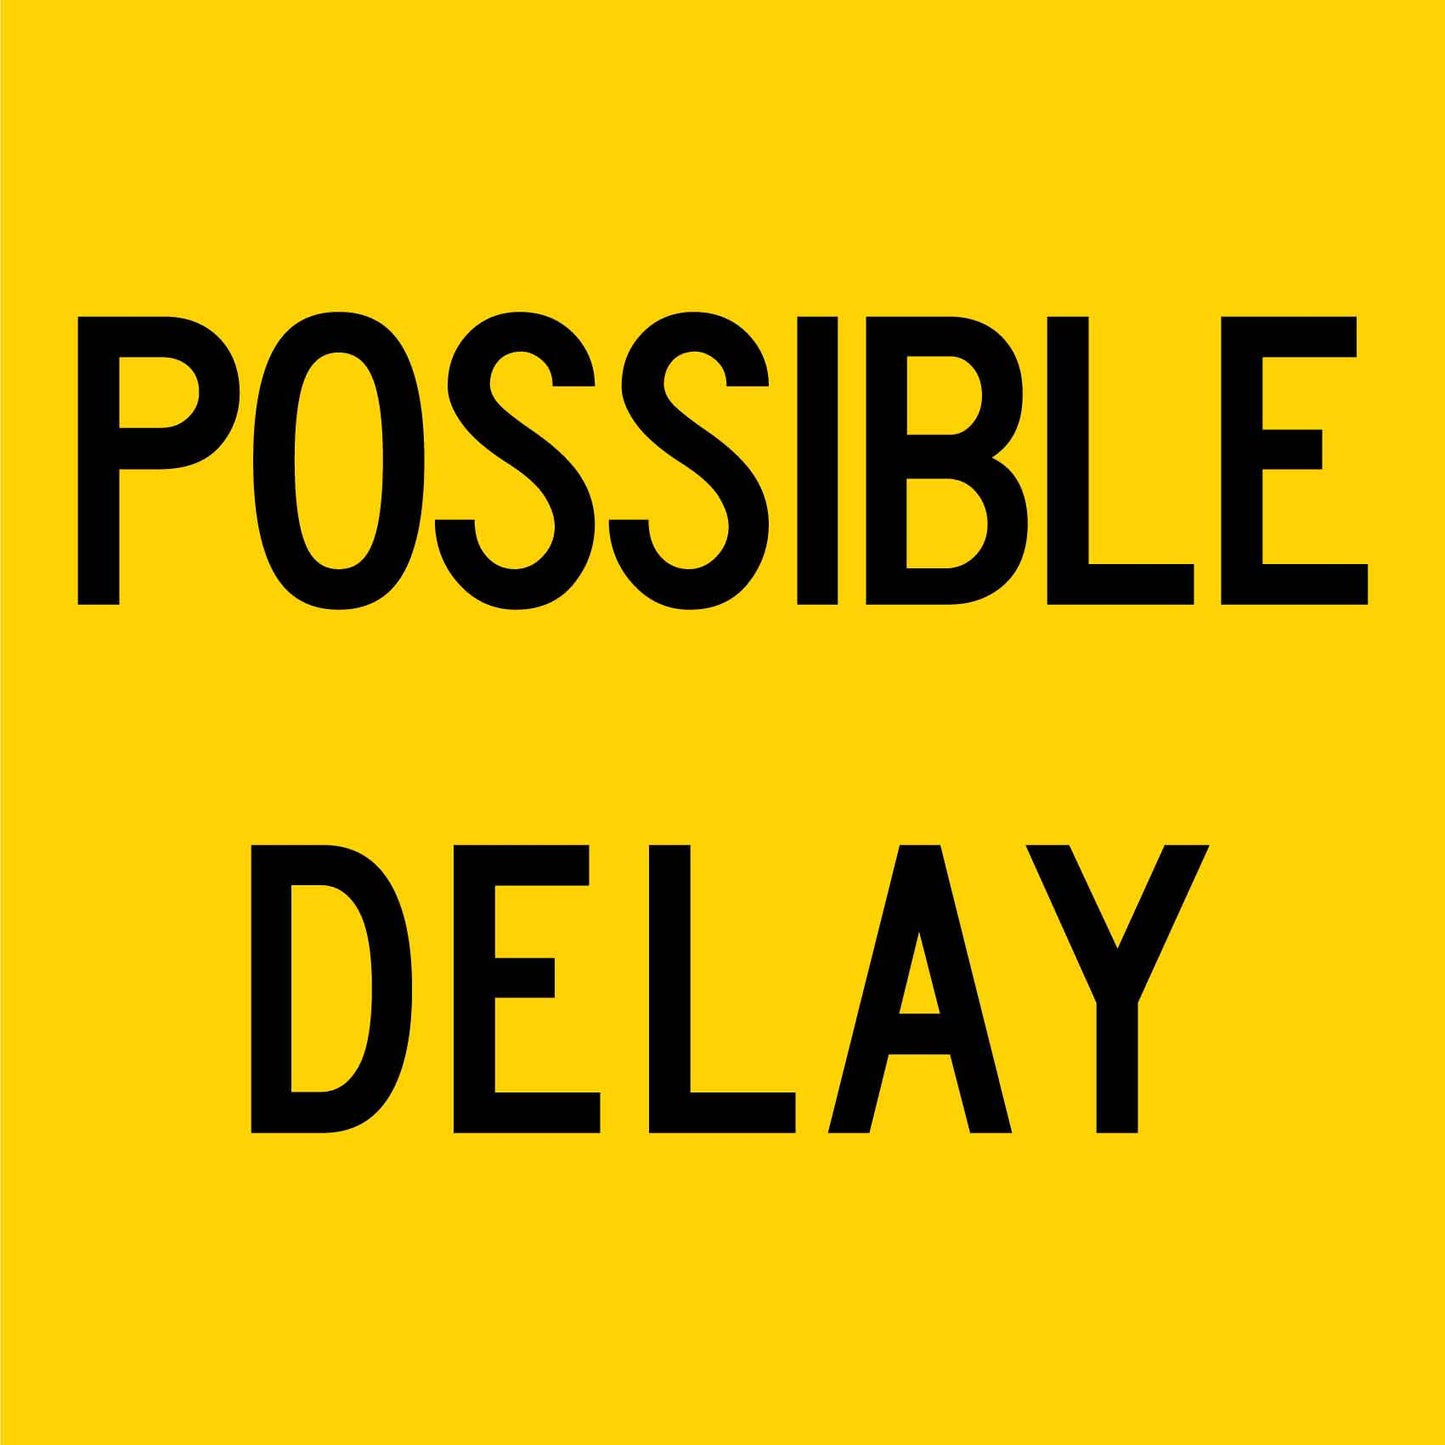 Possible Delay Multi Message Reflective Traffic Sign